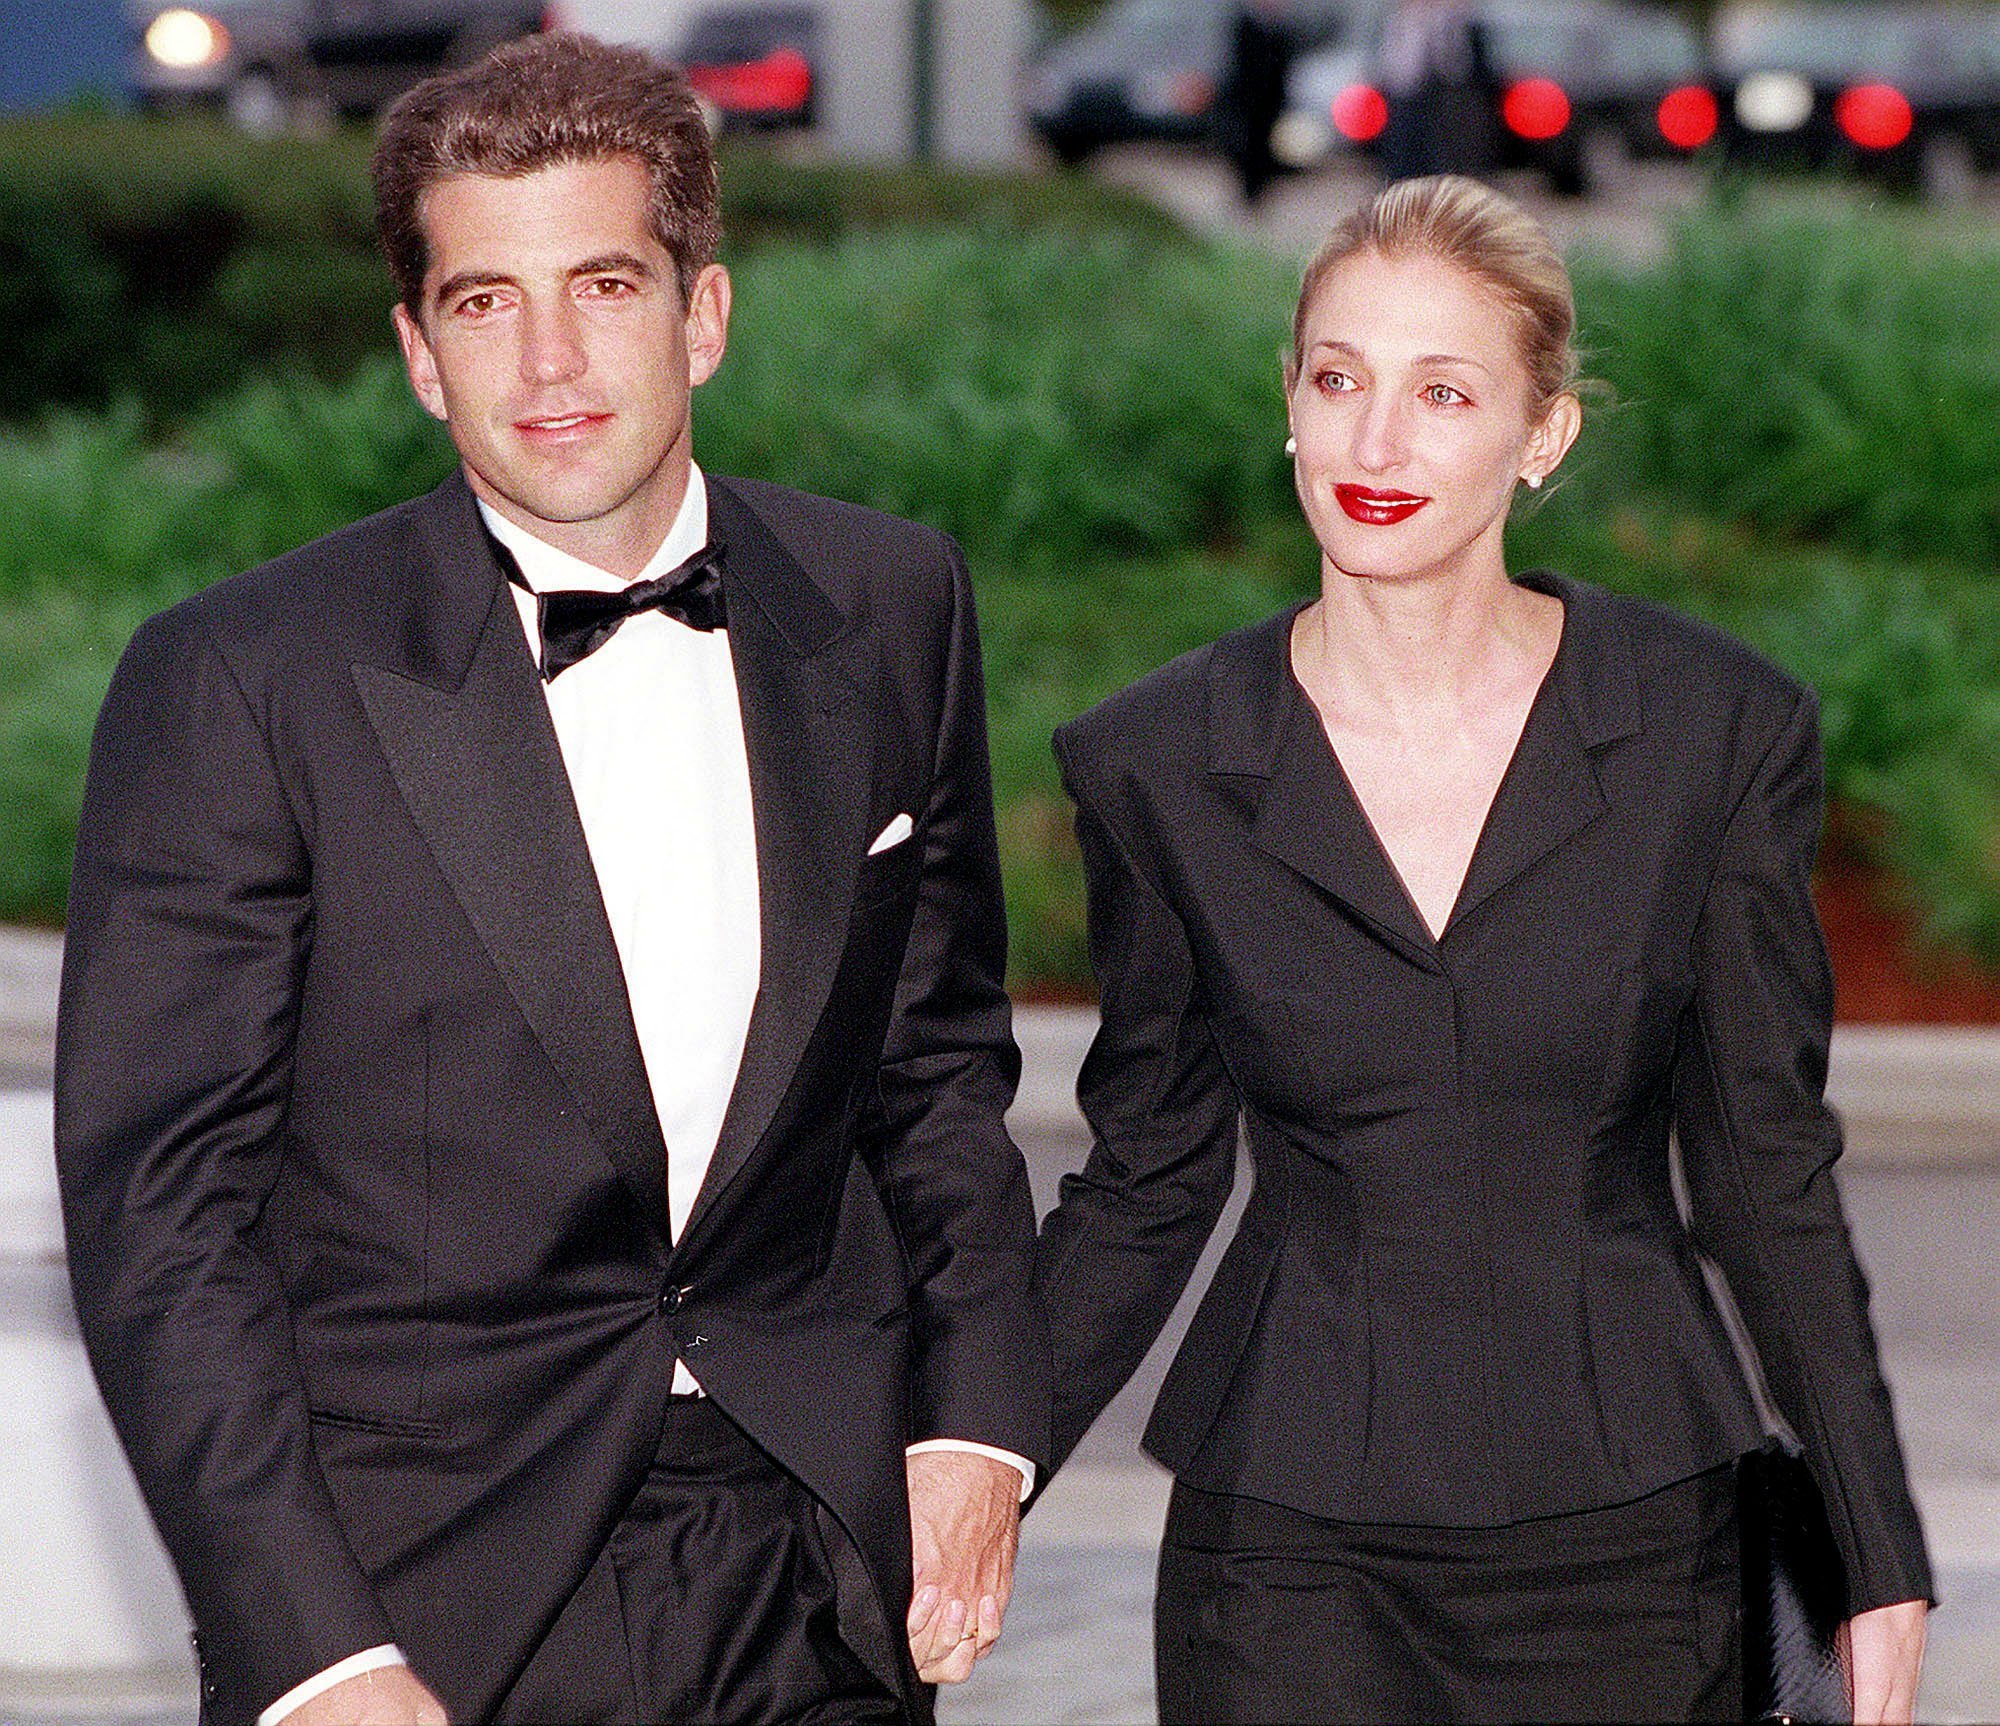 John F. Kennedy, Jr. and Carolyn Bessette Kennedy arrive at the annual John F. Kennedy Library Foundation dinner on May 23, 1999, at the Kennedy Library in Boston, MA. | Source: Getty Images.